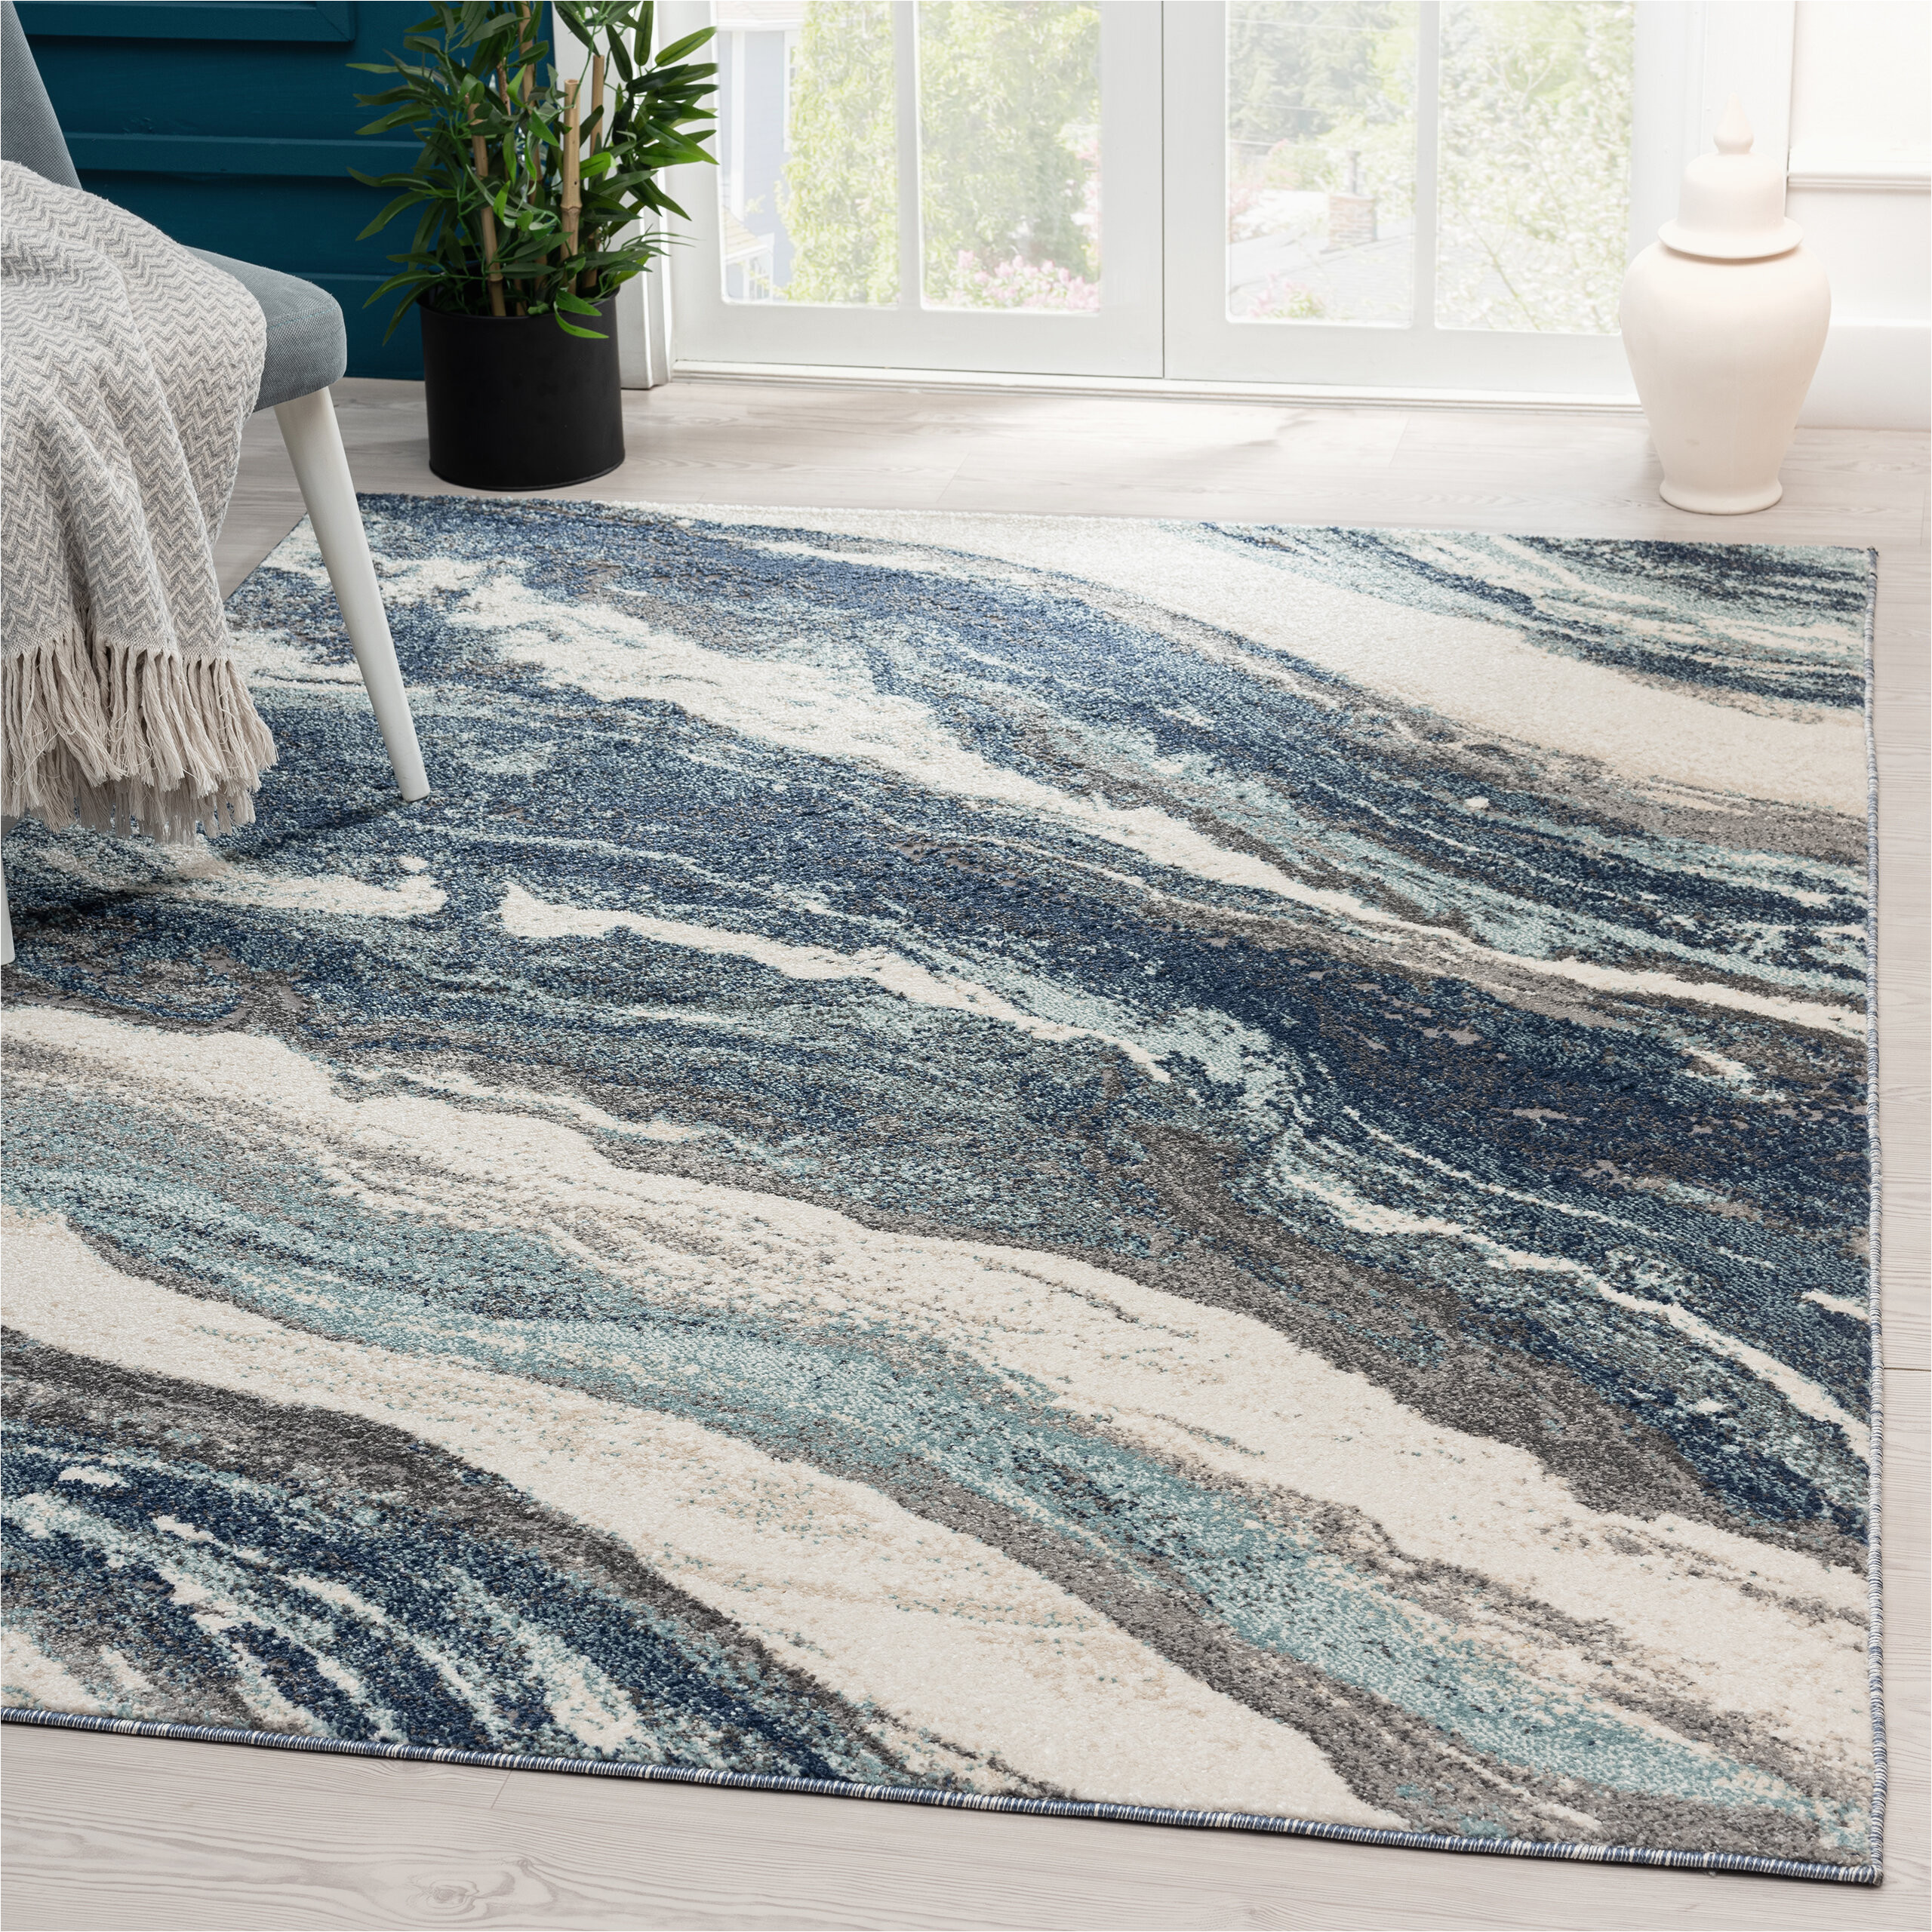 Area Rugs with Blue In them Alayaa Abstract Blue area Rug